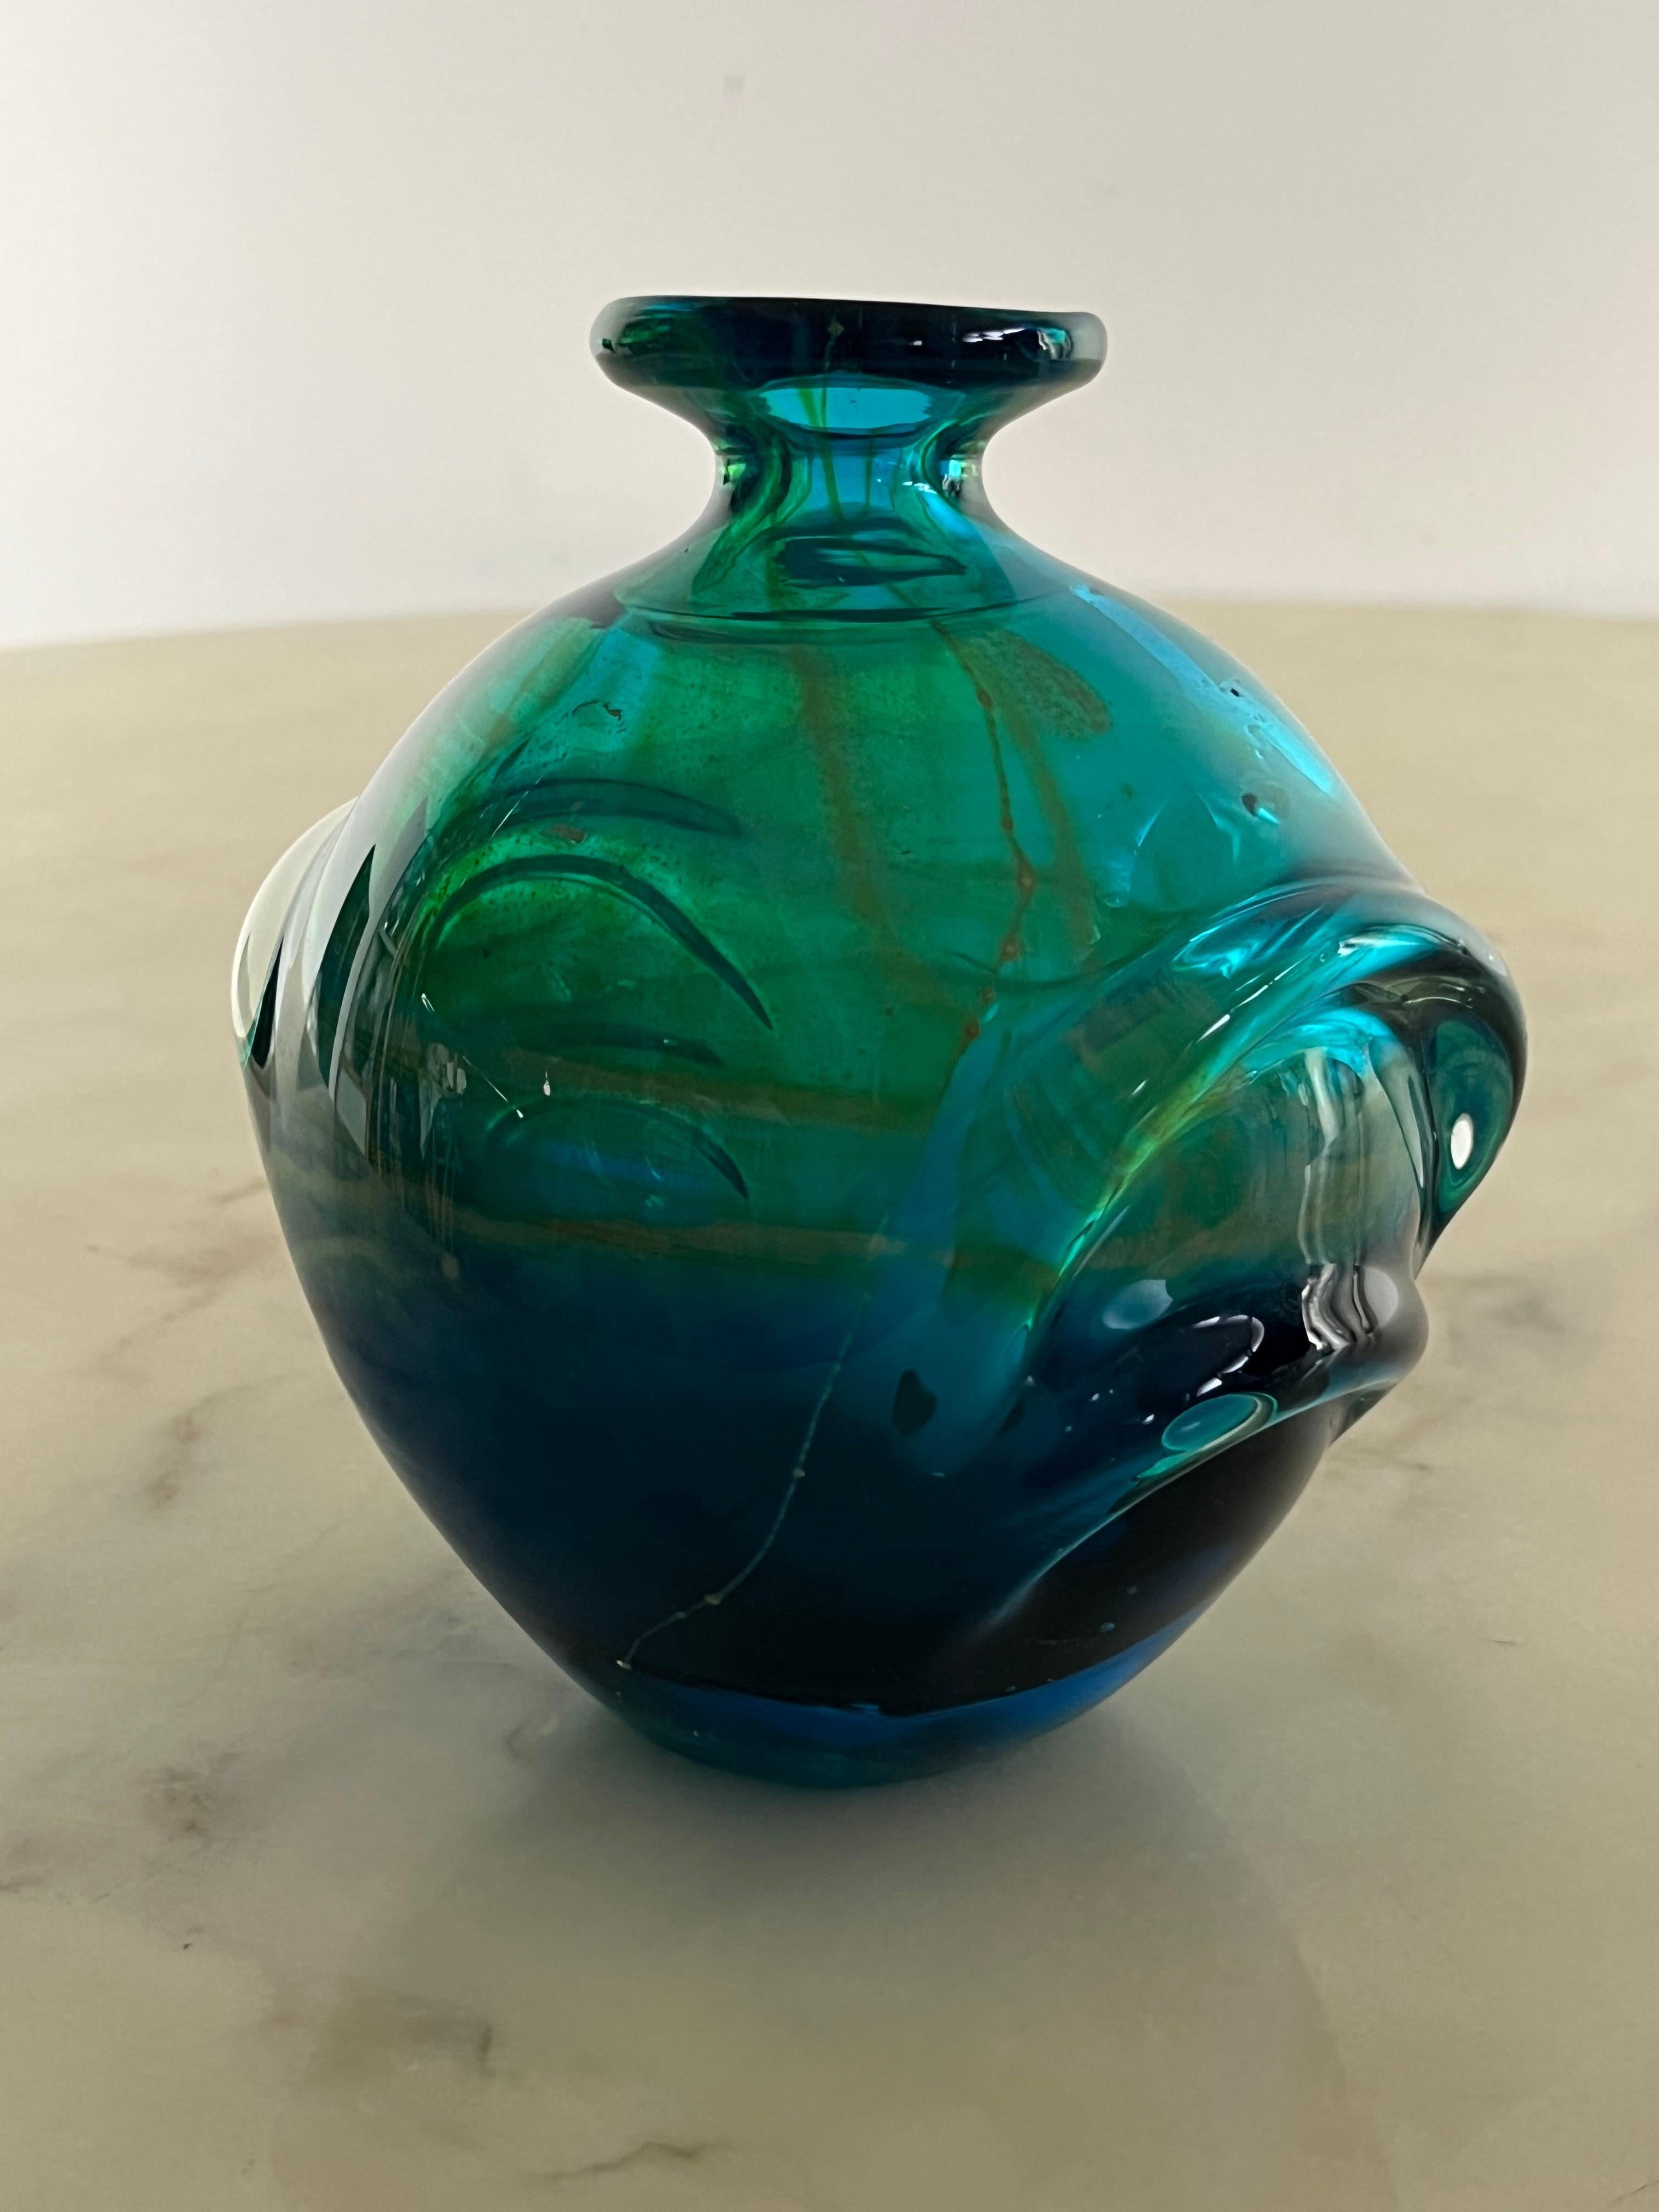 Handmade Maltese Mdina glass vase, 1970s
Extremely rare and in excellent condition.
Note the air bubbles that remained trapped during the processing phases. Very small signs of aging.